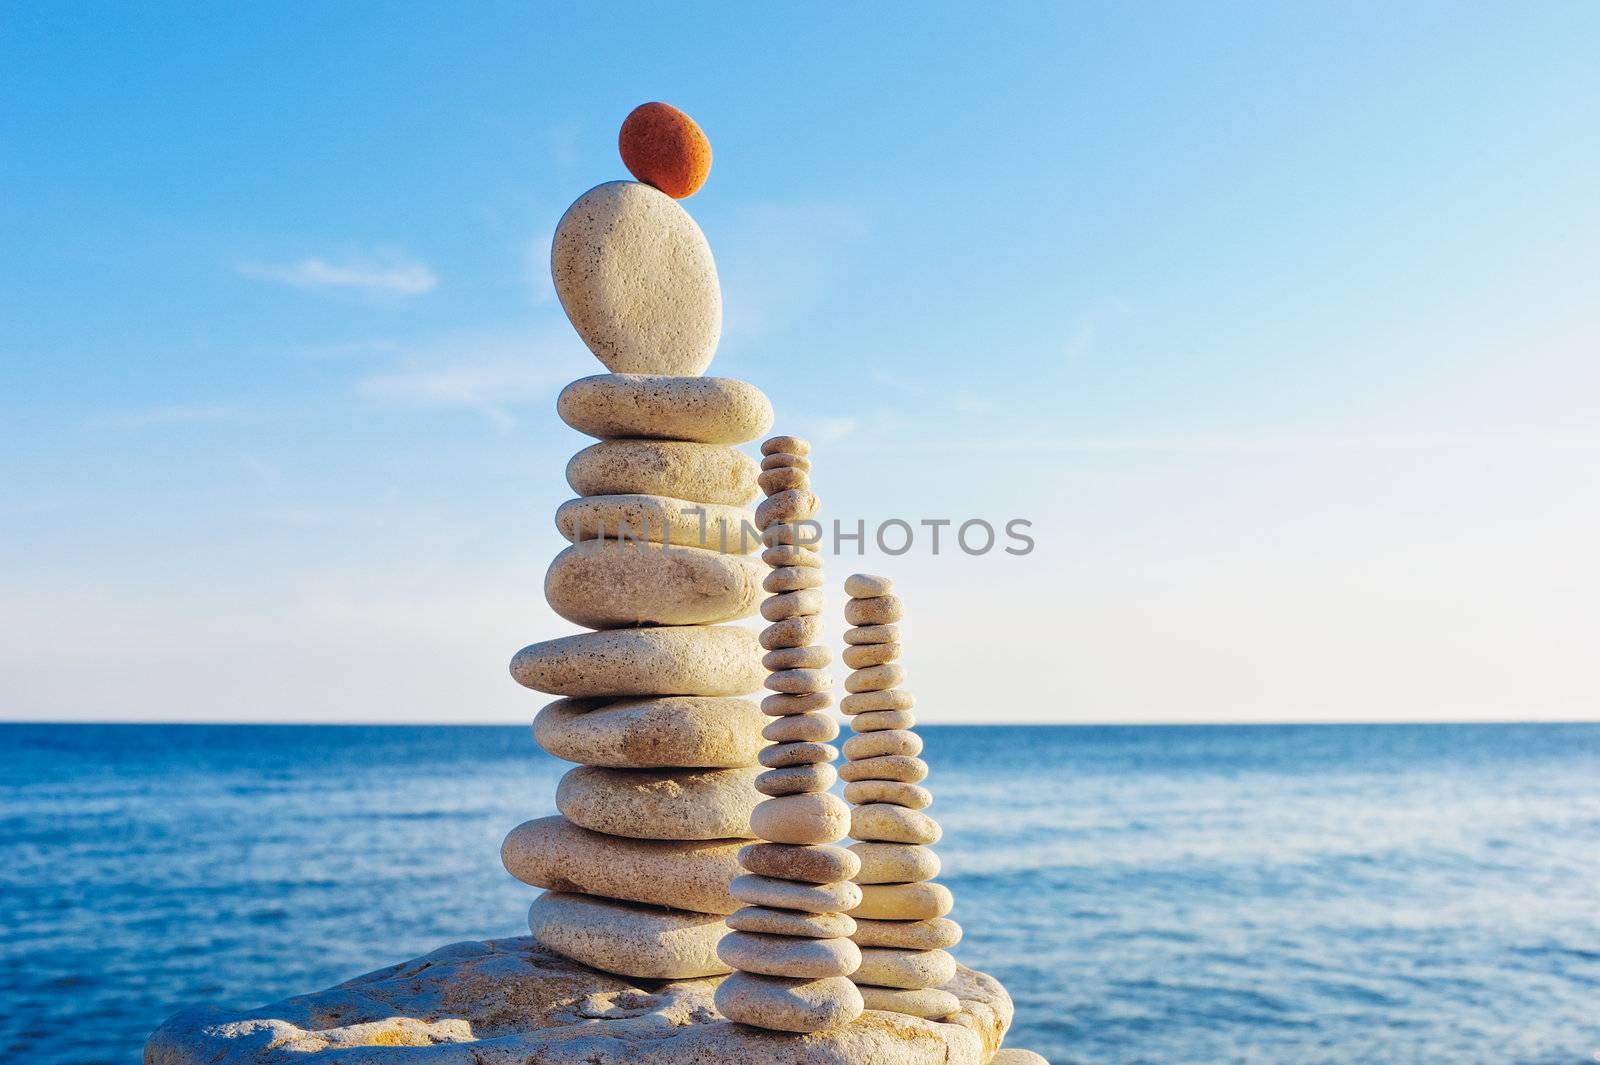 Stacks of pebbles in the balance on the seashore